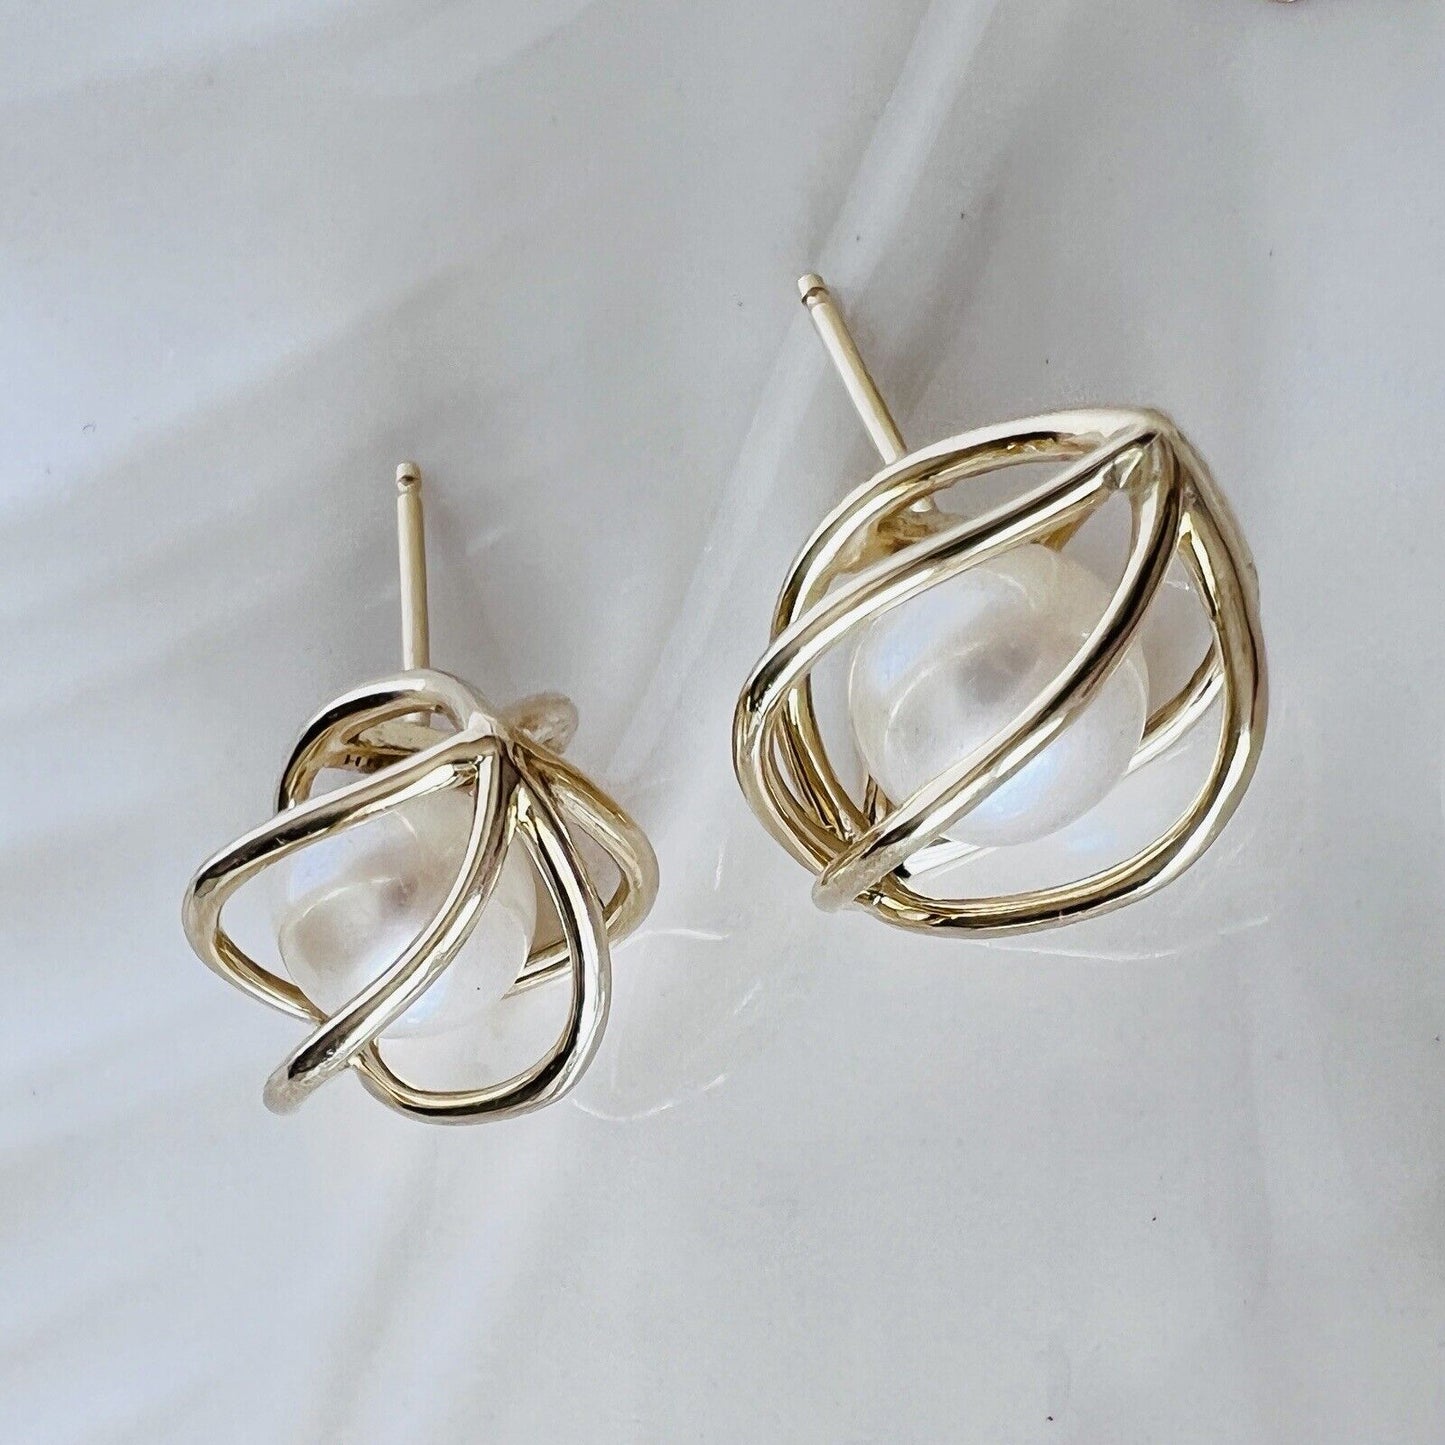 Solid 14k Yellow Gold “Dancing” Pearl Cage-Style Stud Earrings, New